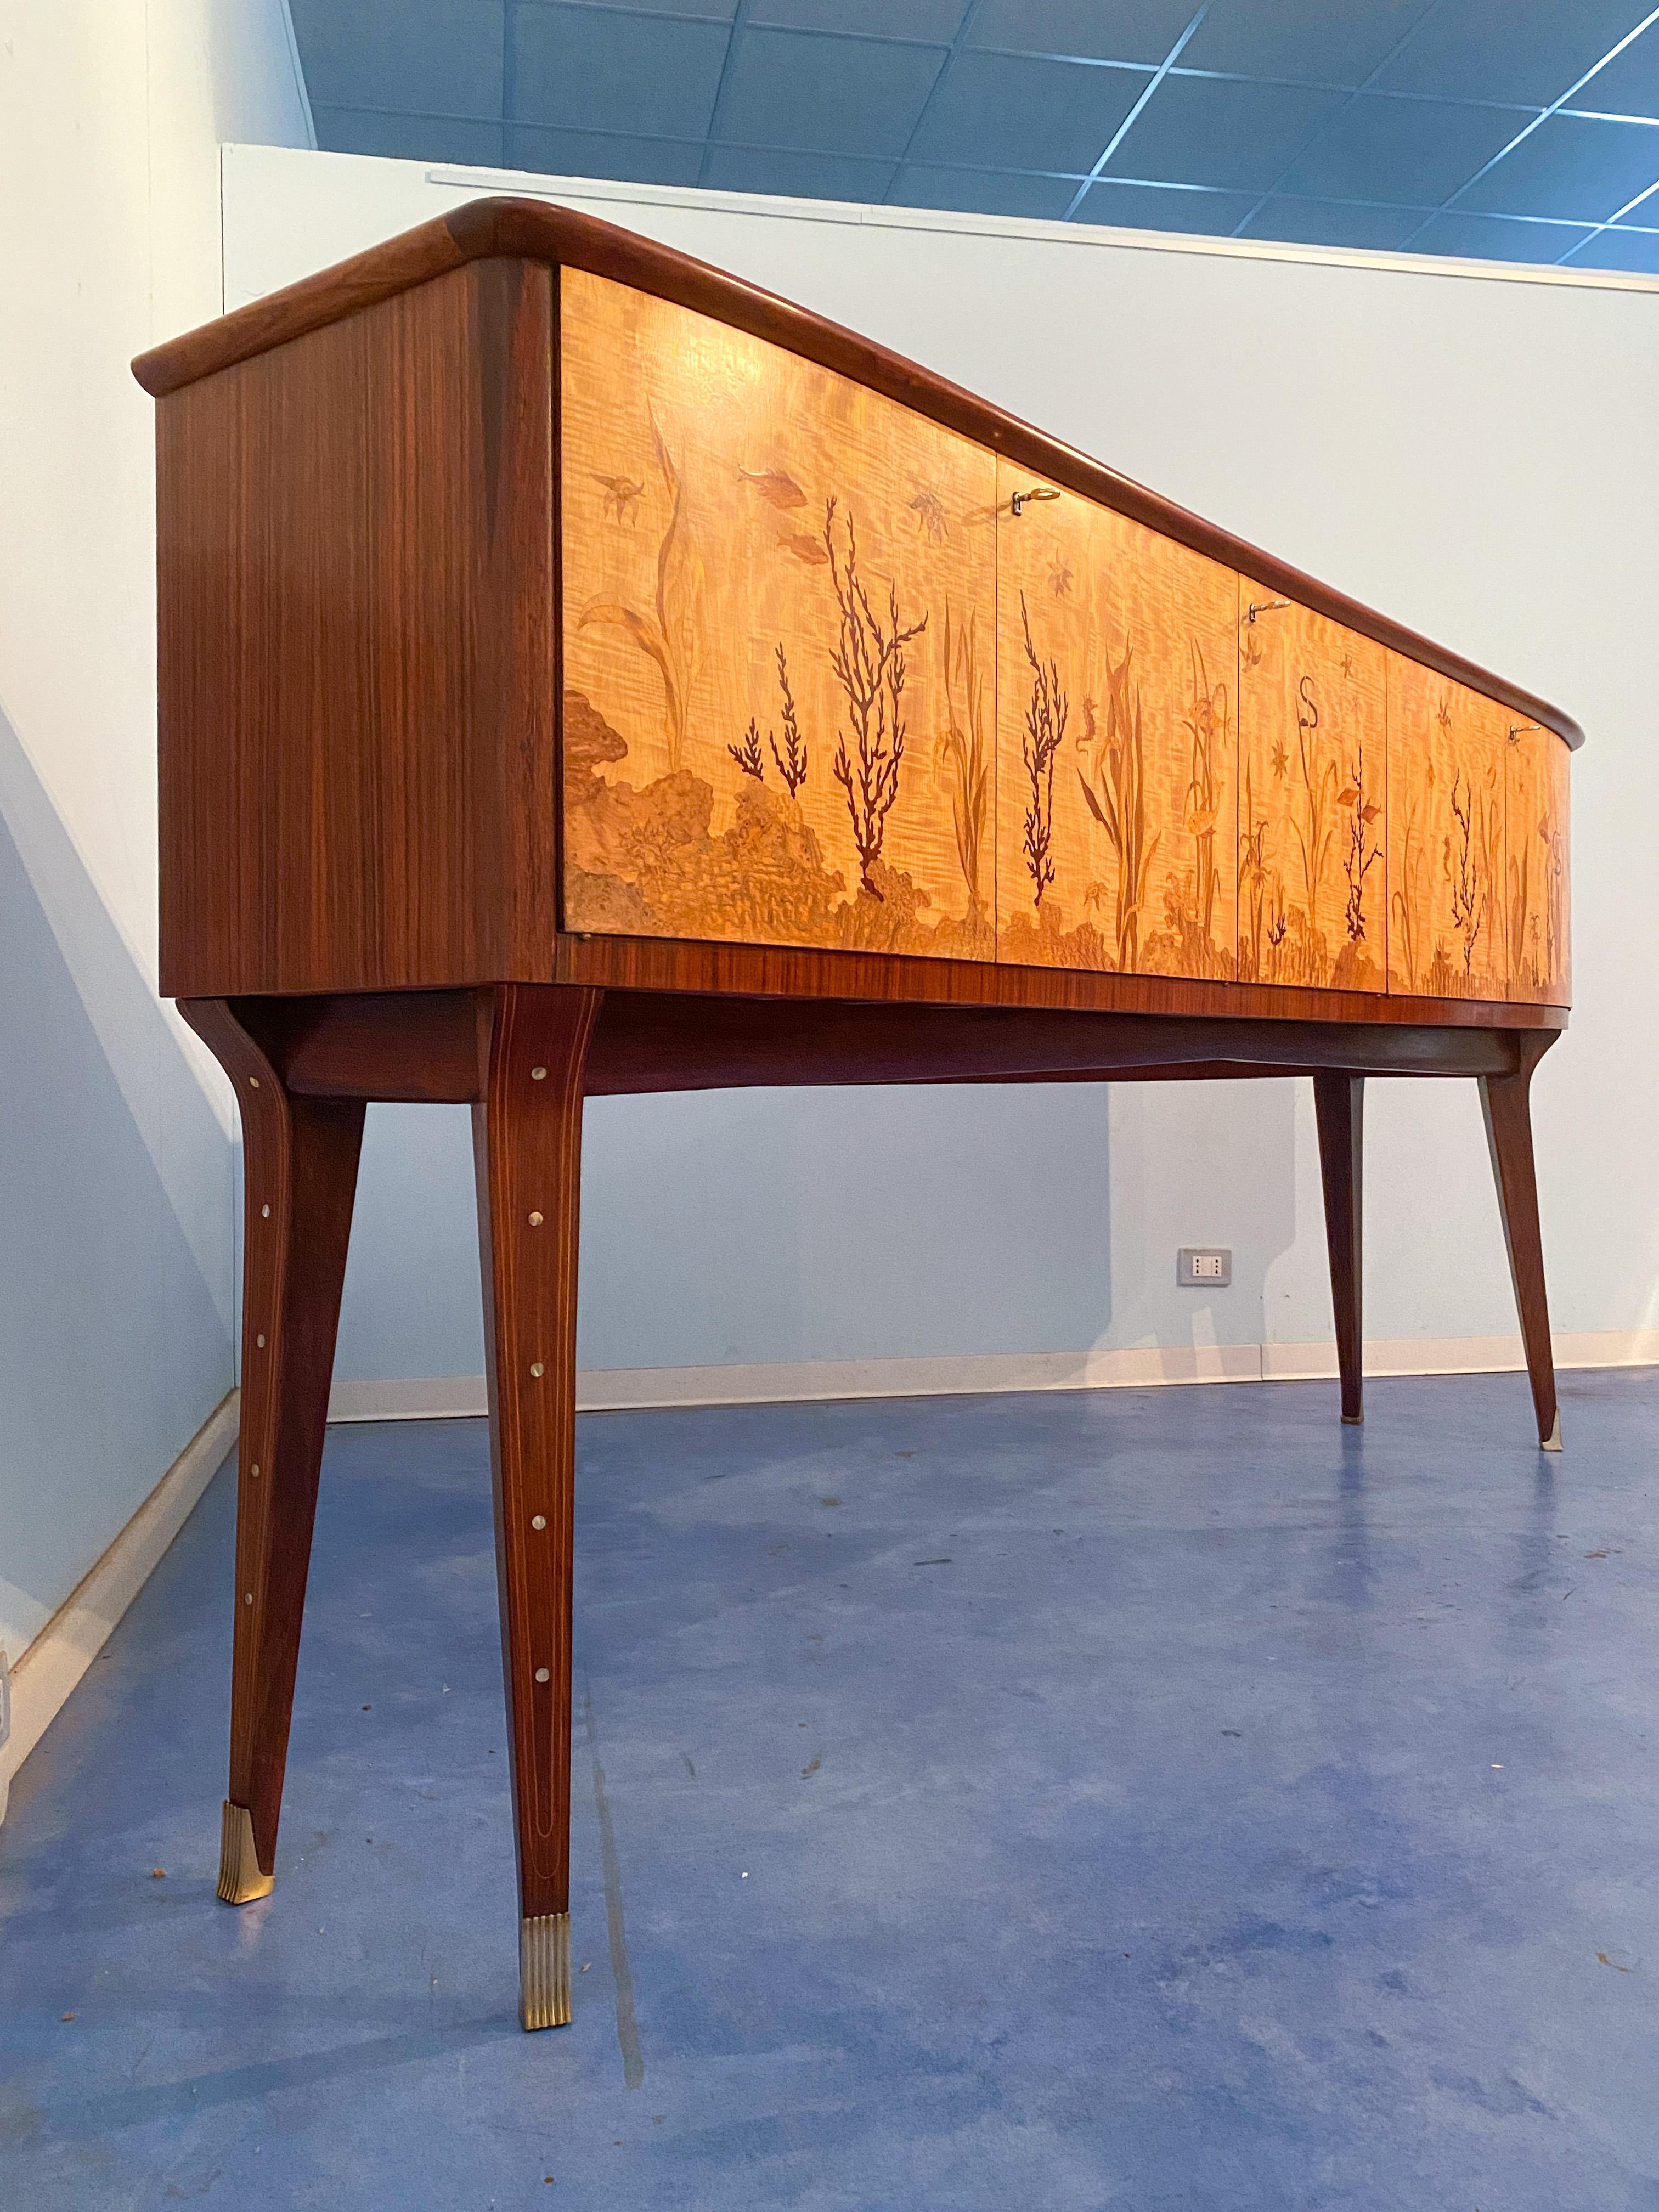 Hand-Crafted Italian Midcentury Inlaid Maple Sideboard by Andrea Gusmai, 1950s For Sale